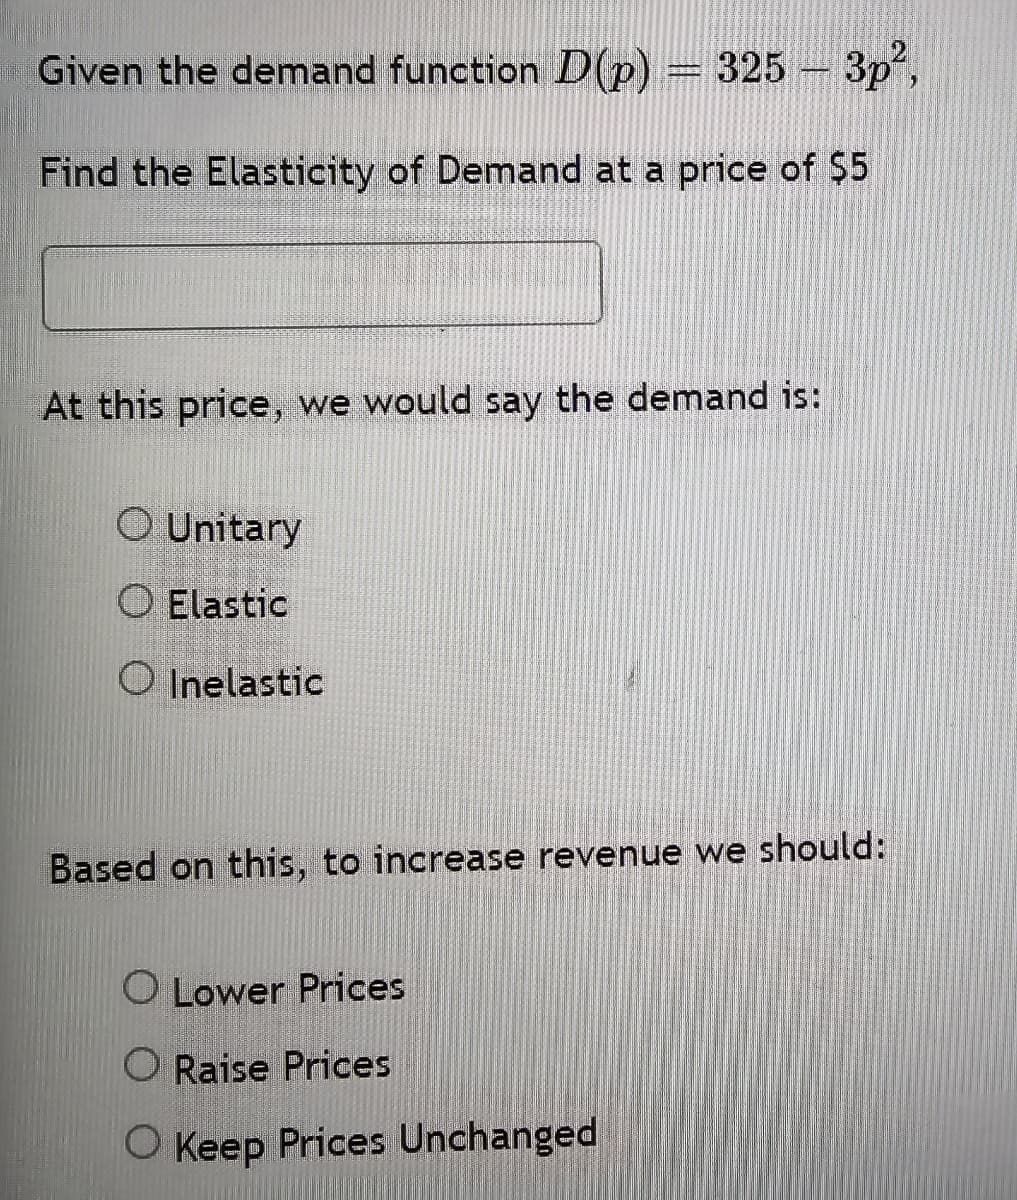 325-3p²,
Given the demand function D(p) = 325 -
Find the Elasticity of Demand at a price of $5
At this price, we would say the demand is:
○ Unitary
O Elastic
Inelastic
Based on this, to increase revenue we should:
O Lower Prices
O Raise Prices
◇ Keep Prices Unchanged